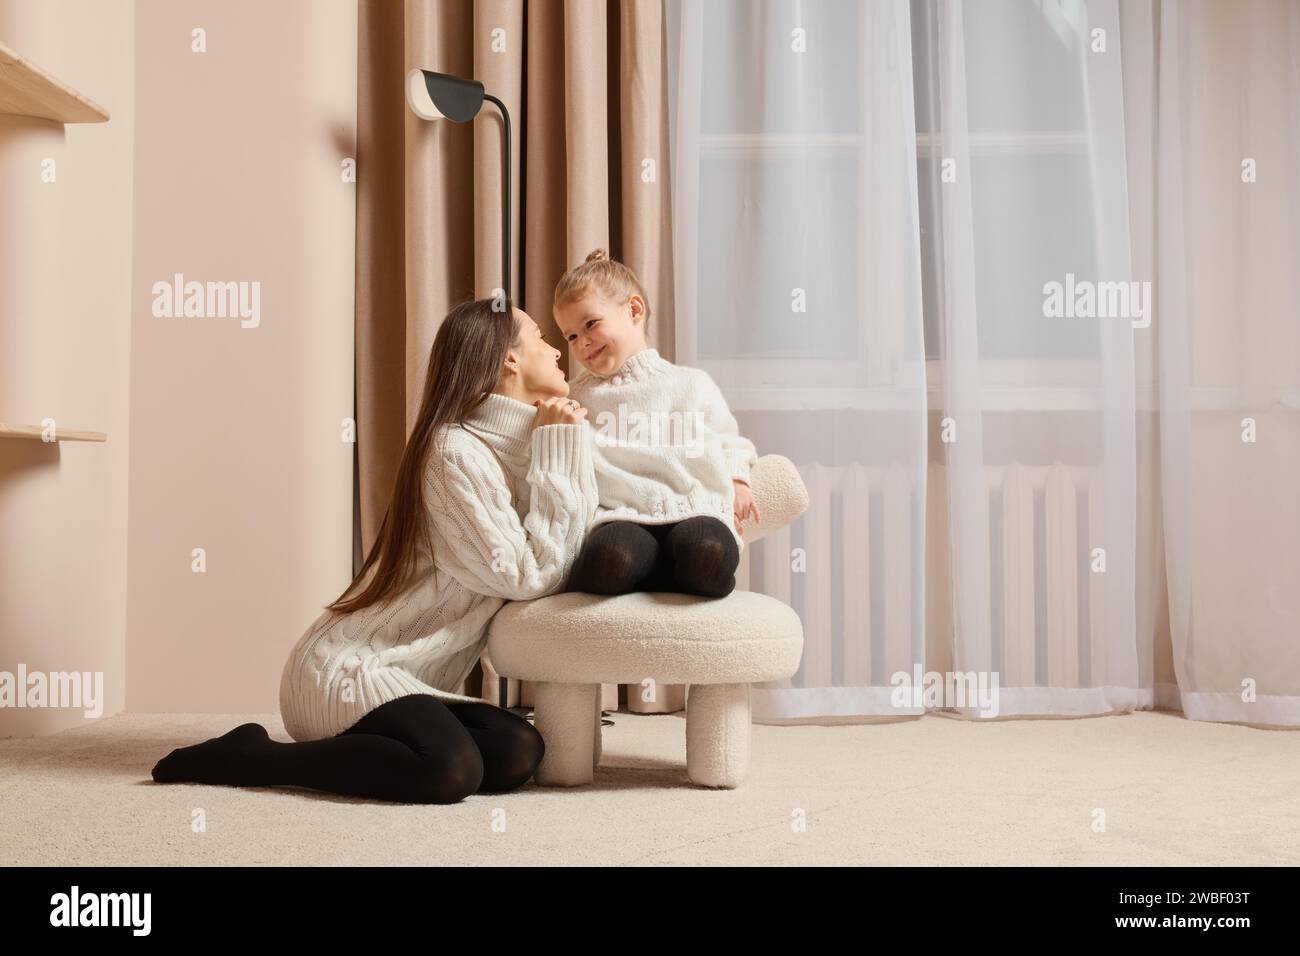 A young mother looks lovingly at her little daughter sitting on soft chair Stock Photo